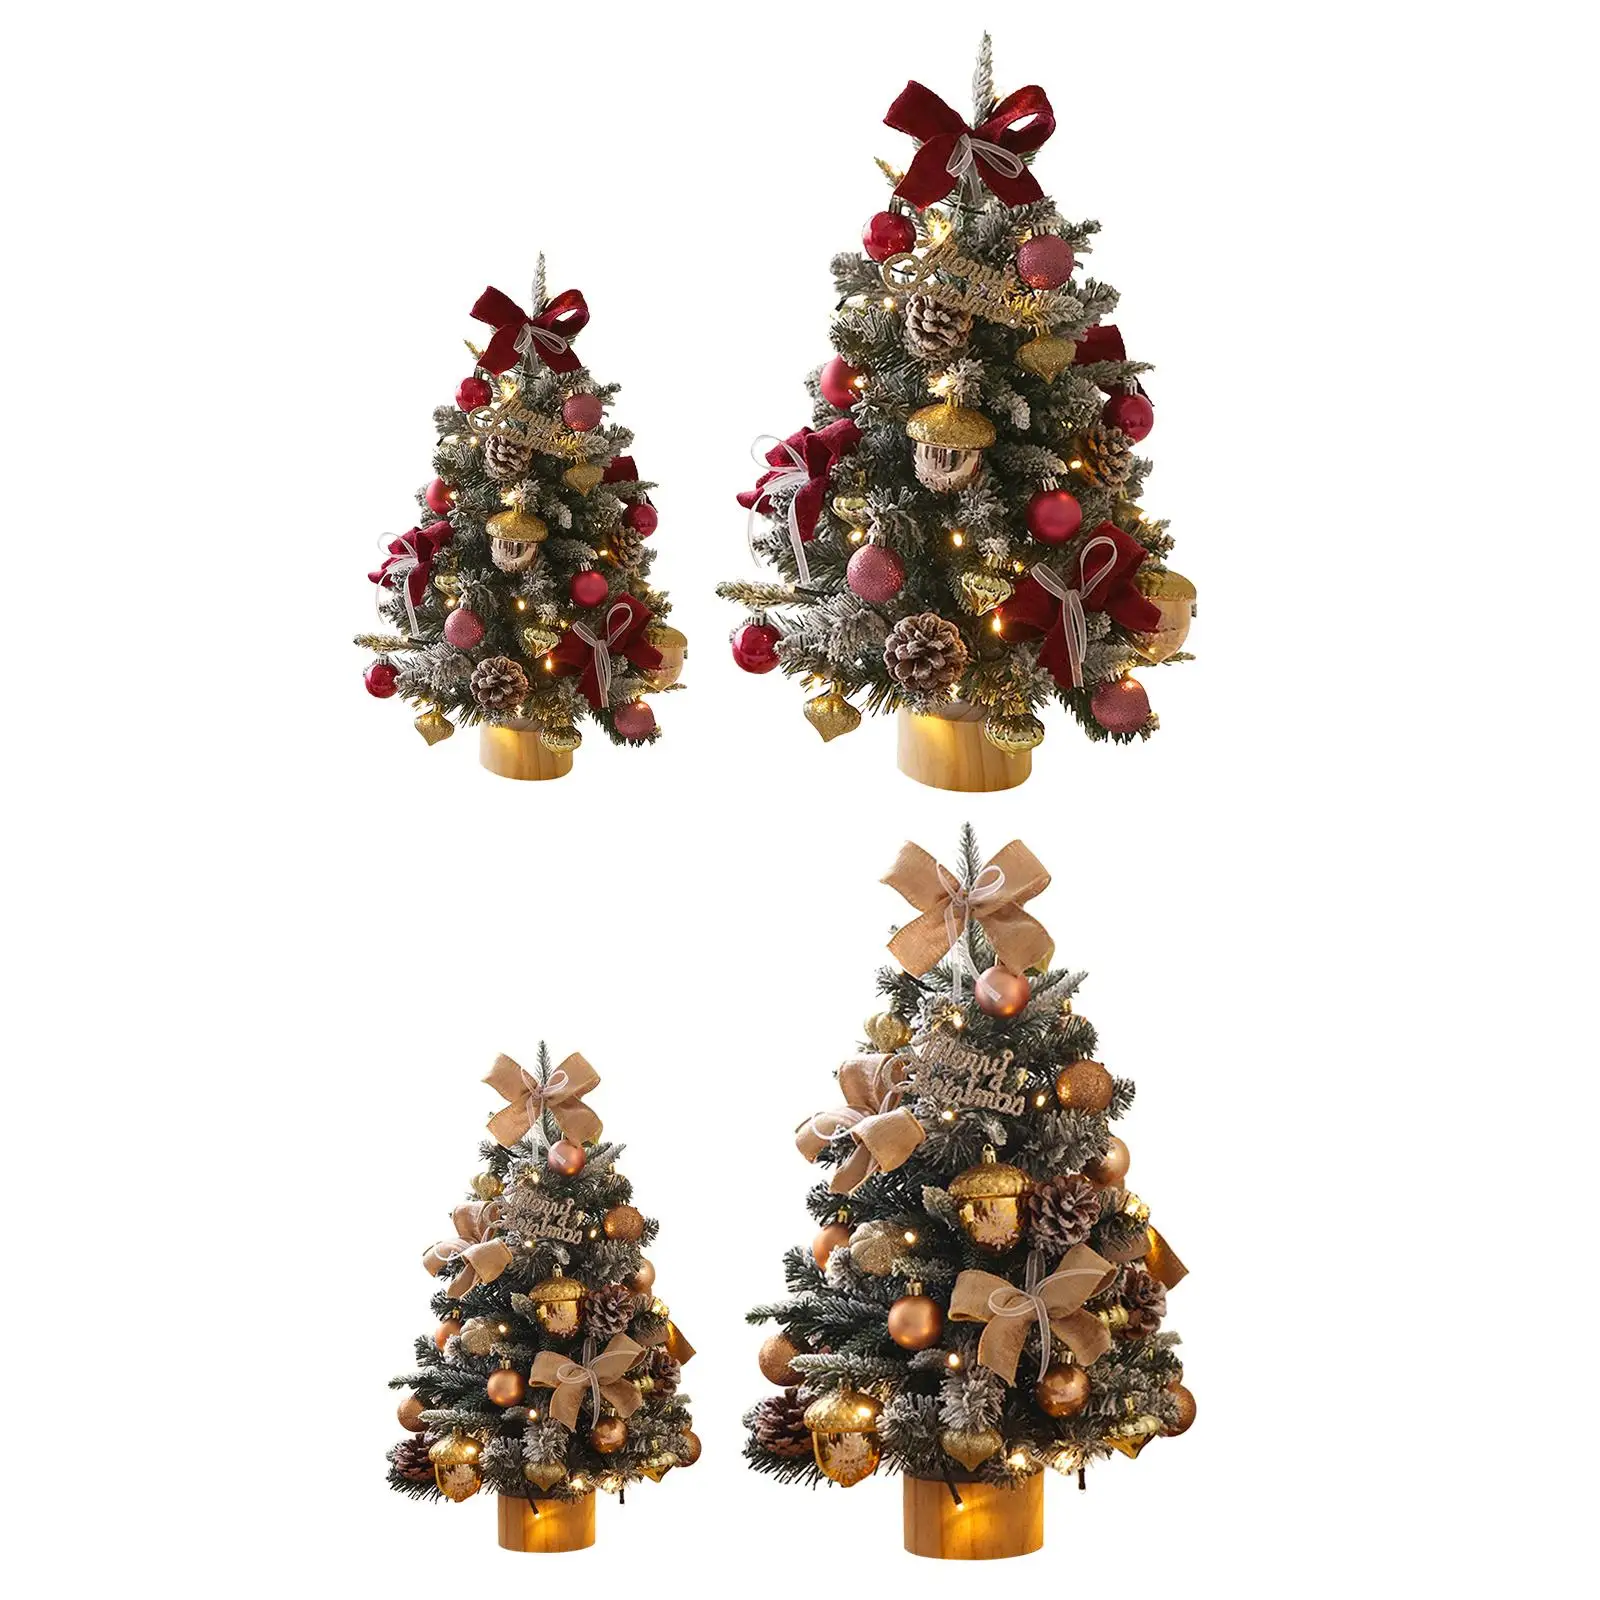 Artificial Christmas Tree with Lights Small Xmas Tree for Holiday Garden Dinner Fireplace Decorative